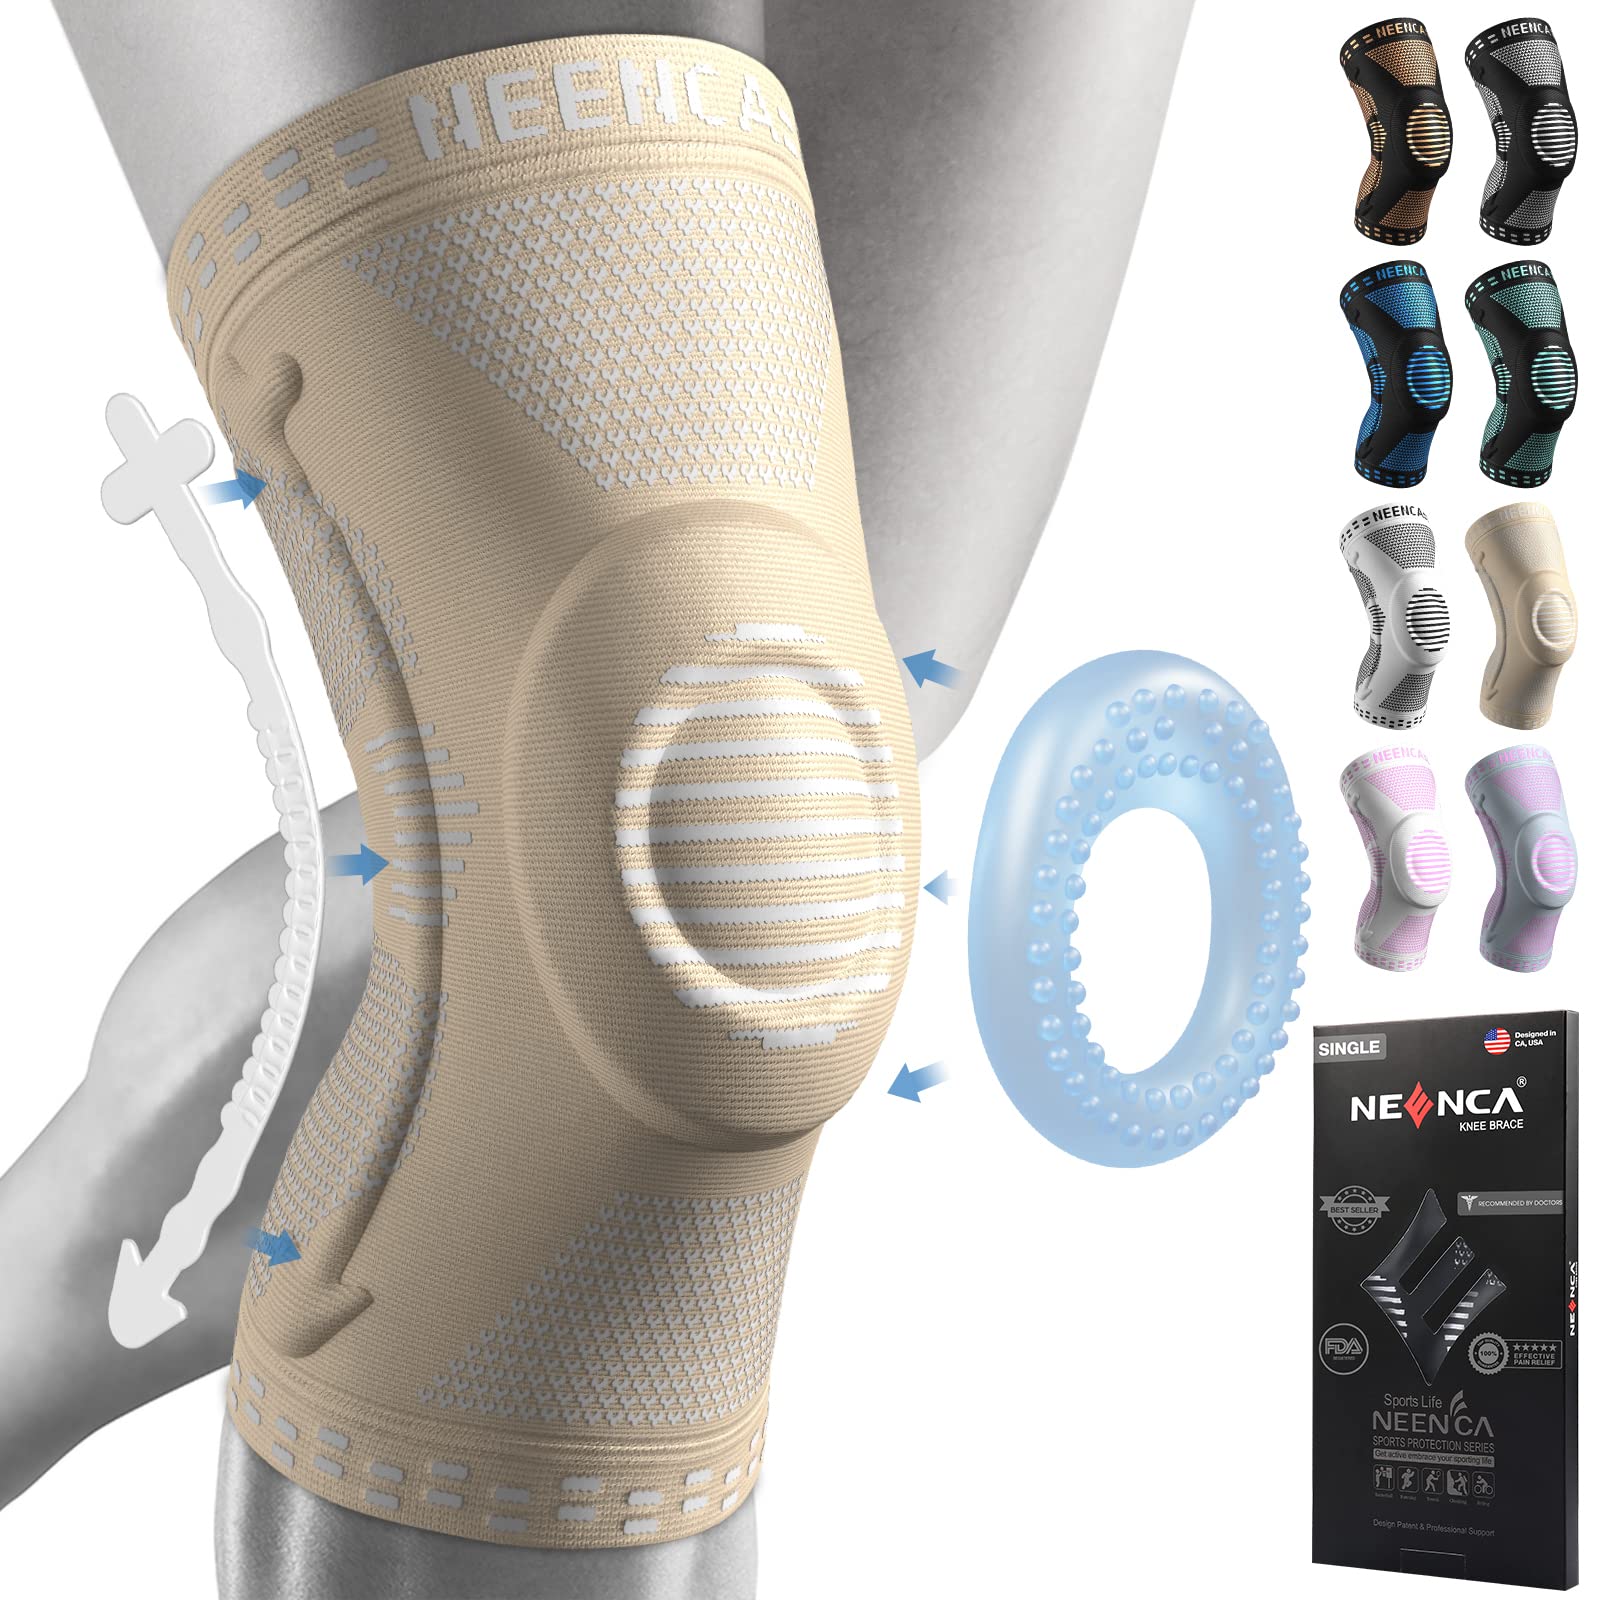 NEENCA Knee Brace Knee Compression Sleeve Support with Patella Gel